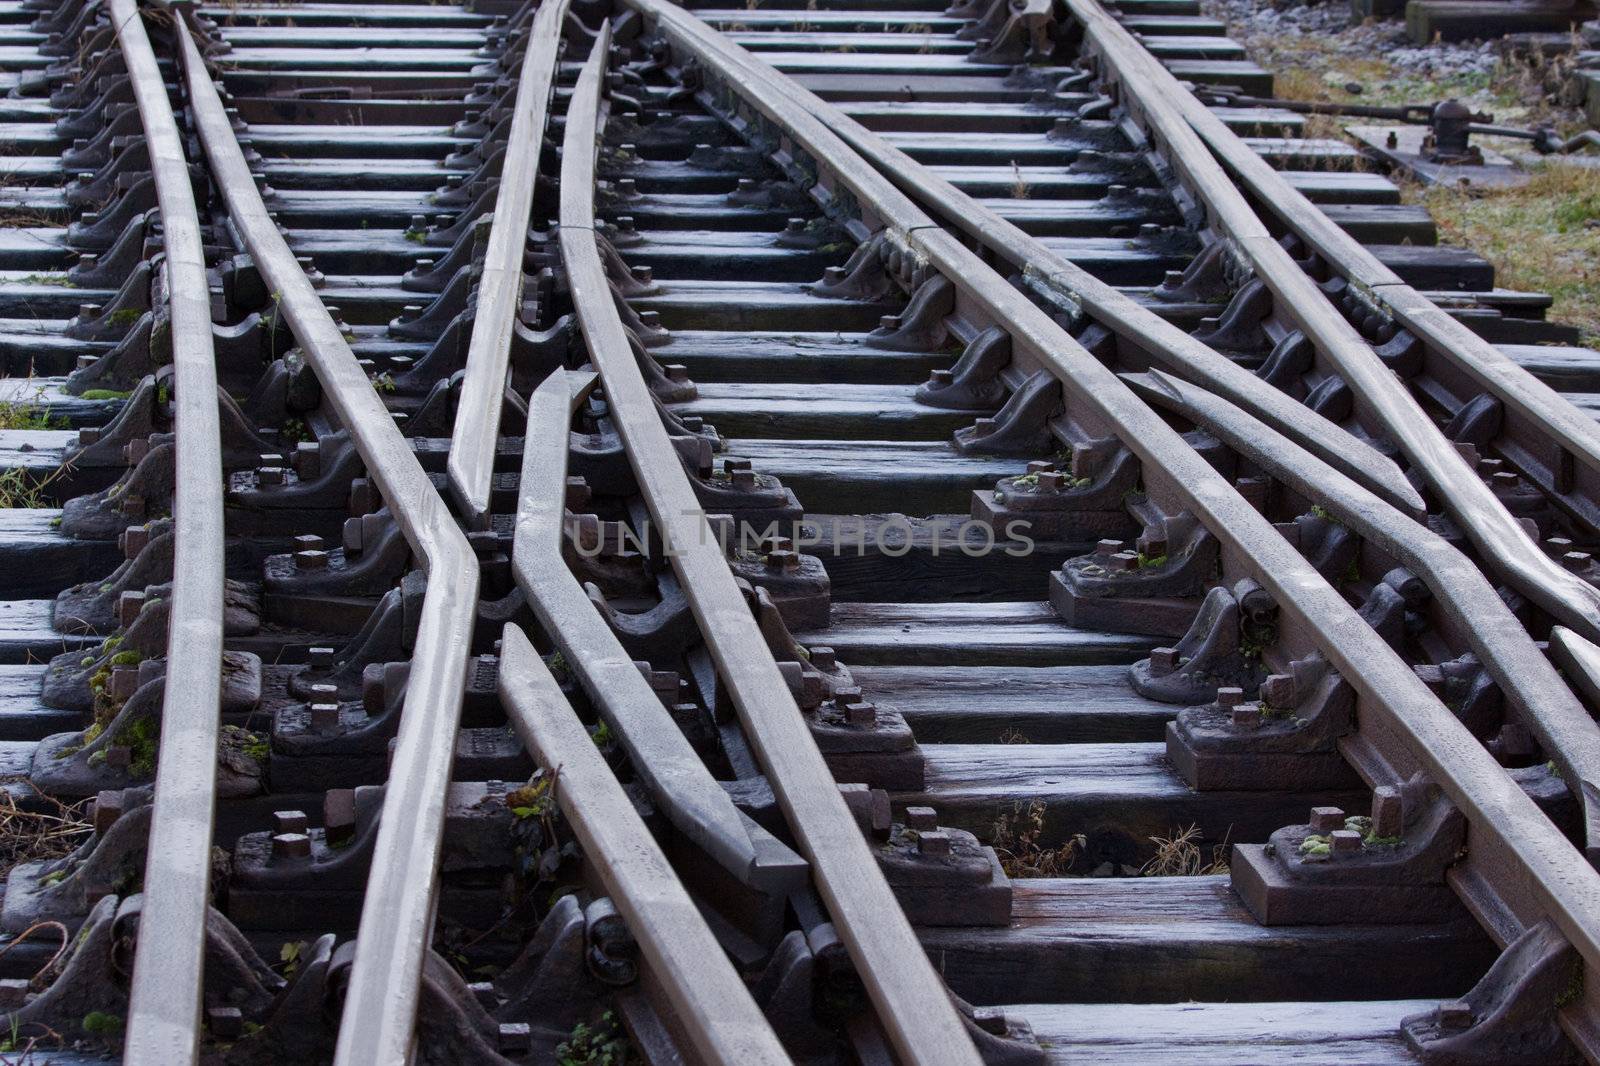 Railway lines after overnight frost